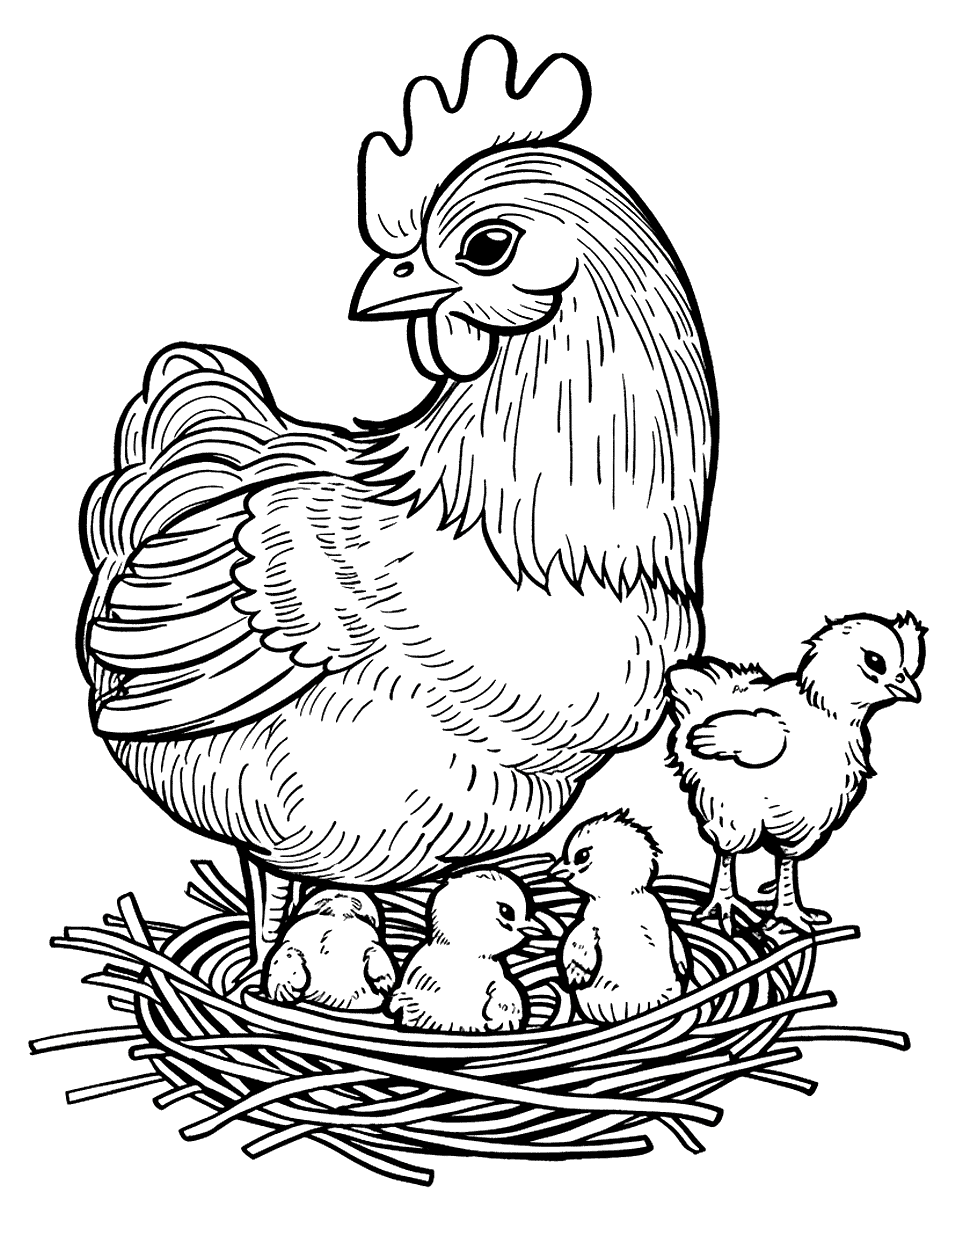 Mother Hen with Chicks Chicken Coloring Page - A mother hen surrounded by her tiny, fluffy chicks in a cozy nest.